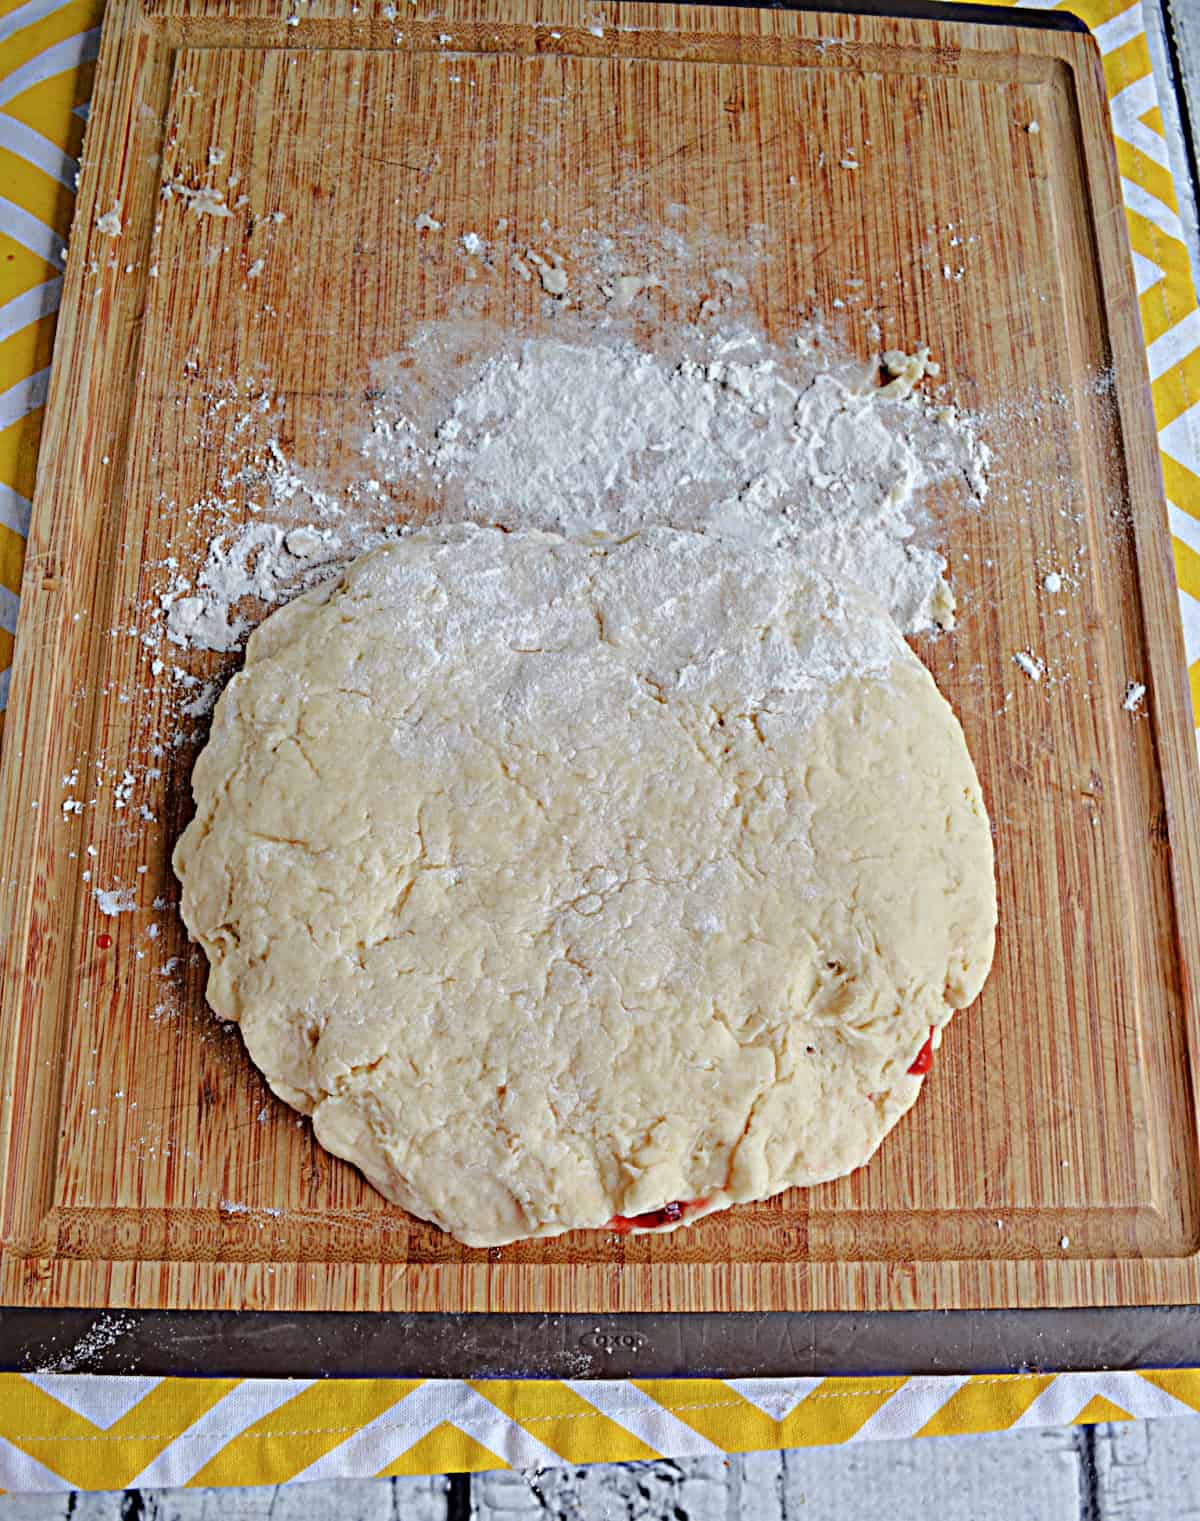 A thick scone dough filled with jame.